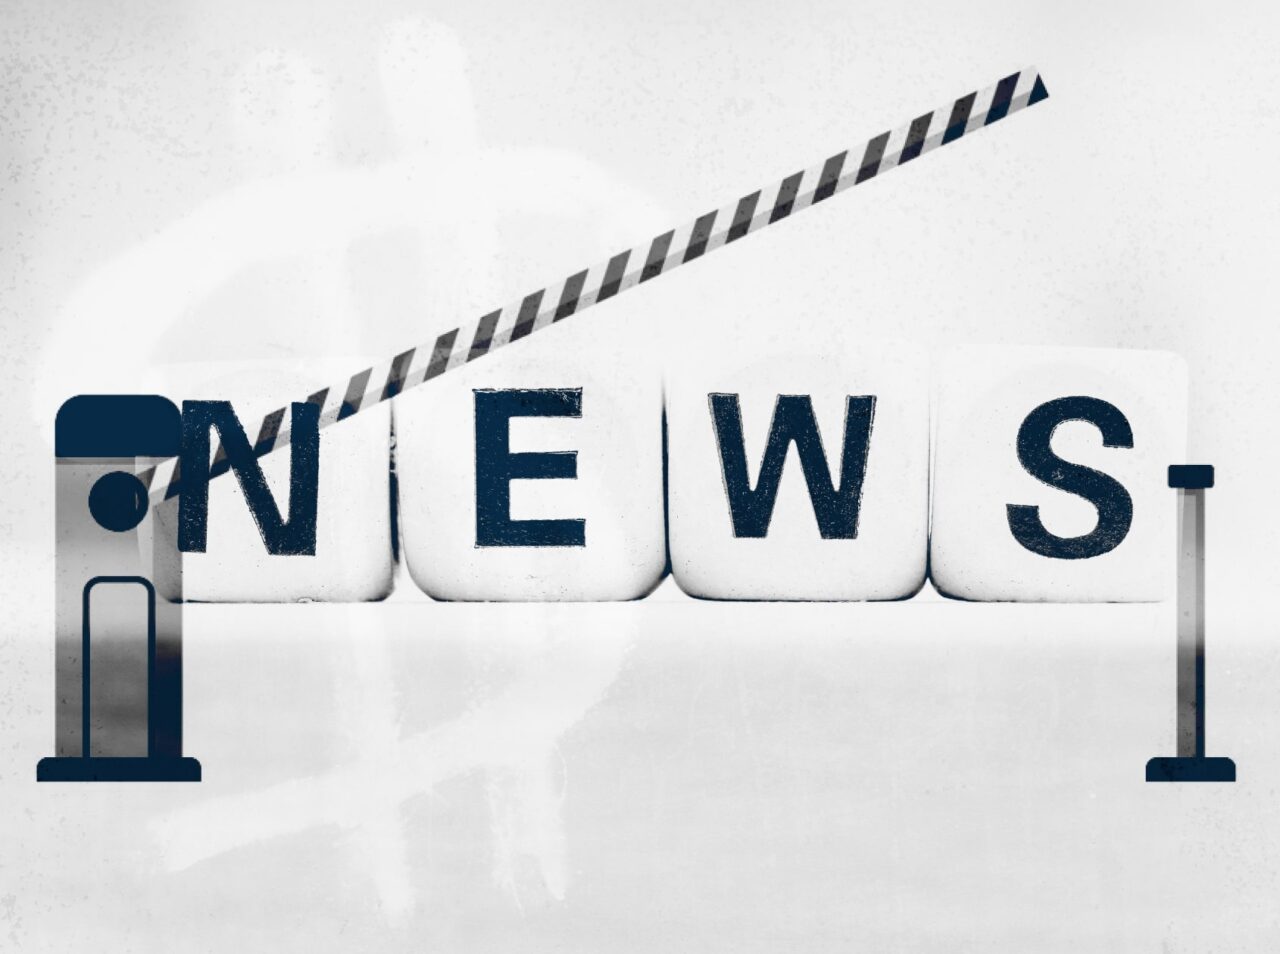 The word "NEWS" displayed on four blocks with a striped barrier arm positioned diagonally over them, partially obstructing the view.